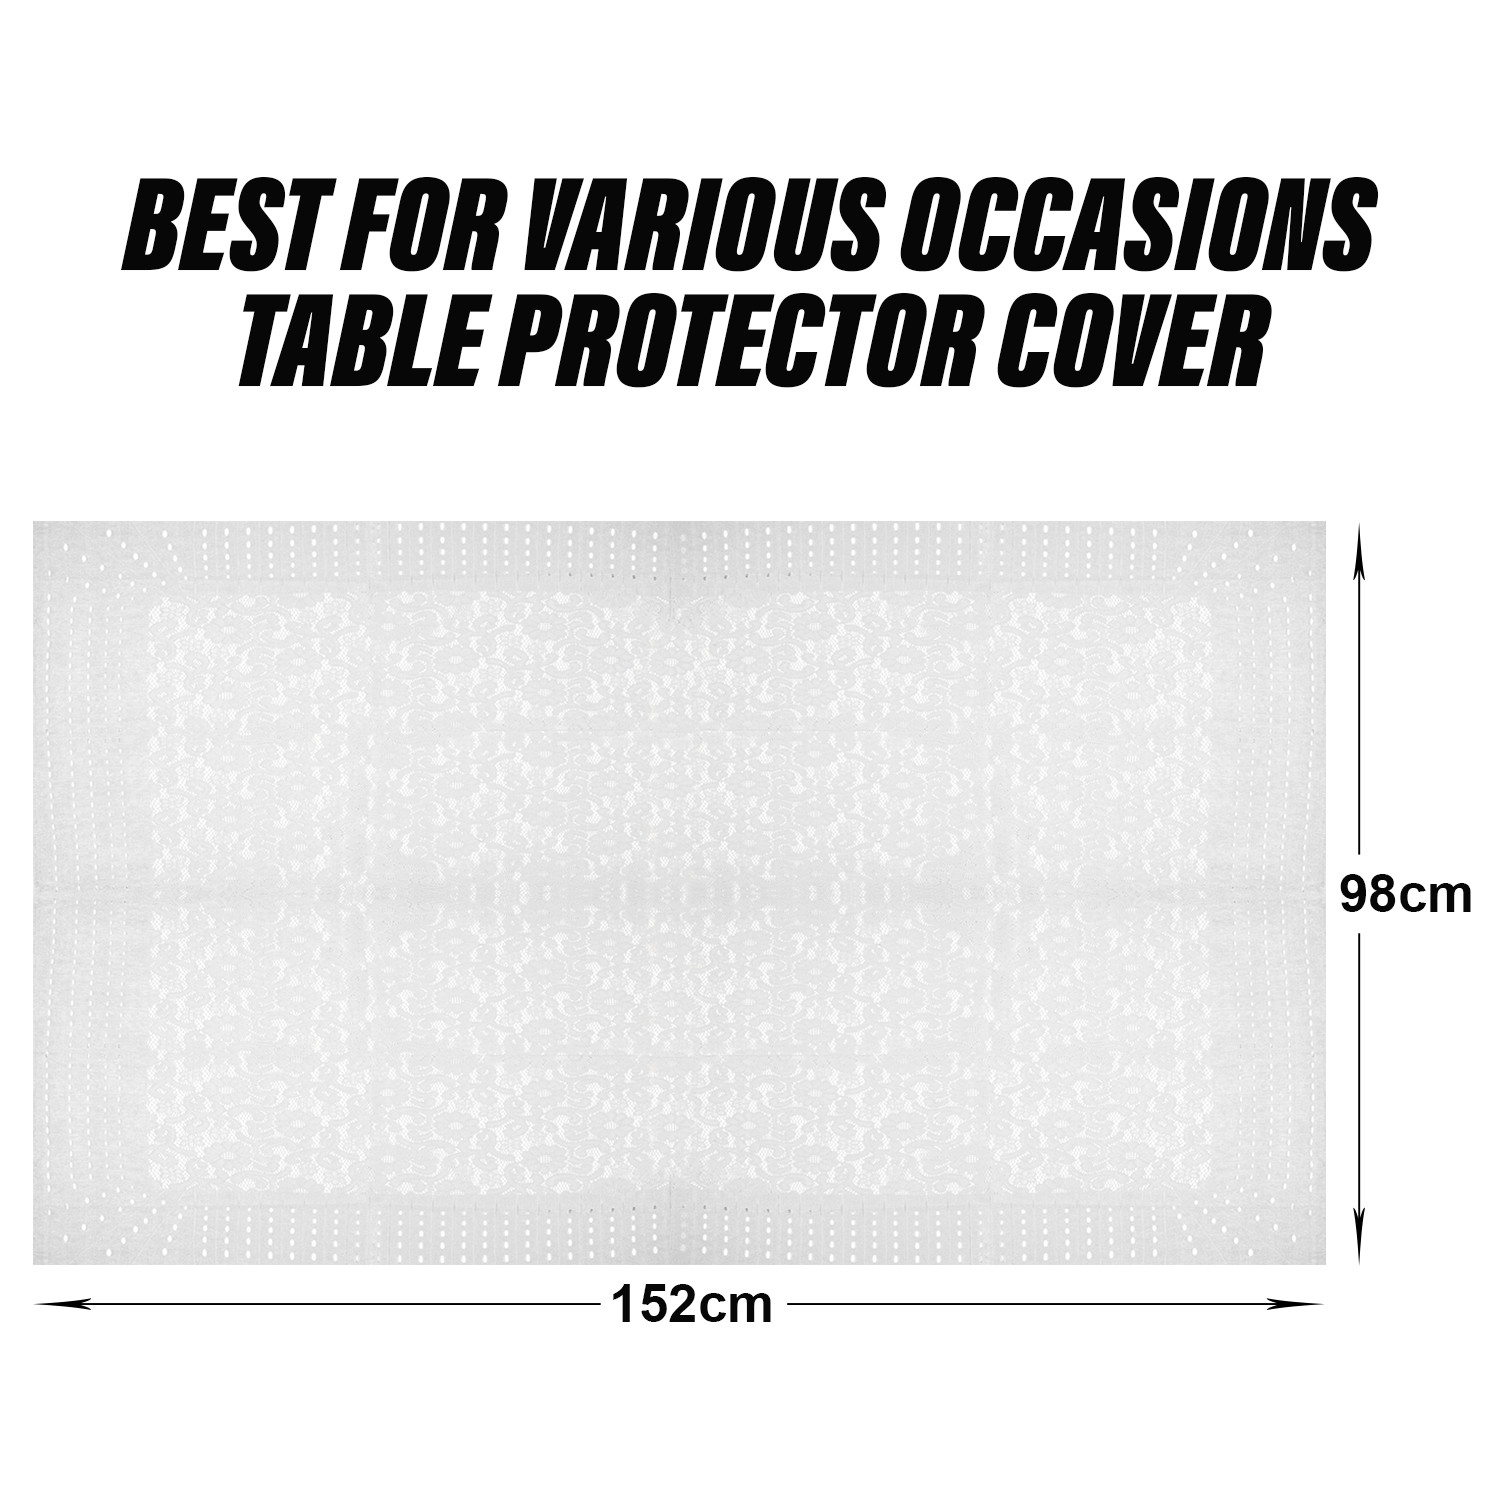 Kuber Industries Center Table Cover | Shinning Net Cashew Design Table Cover | Luxurious Table Protector Cover for Home Decor | 40x60 Inch | White